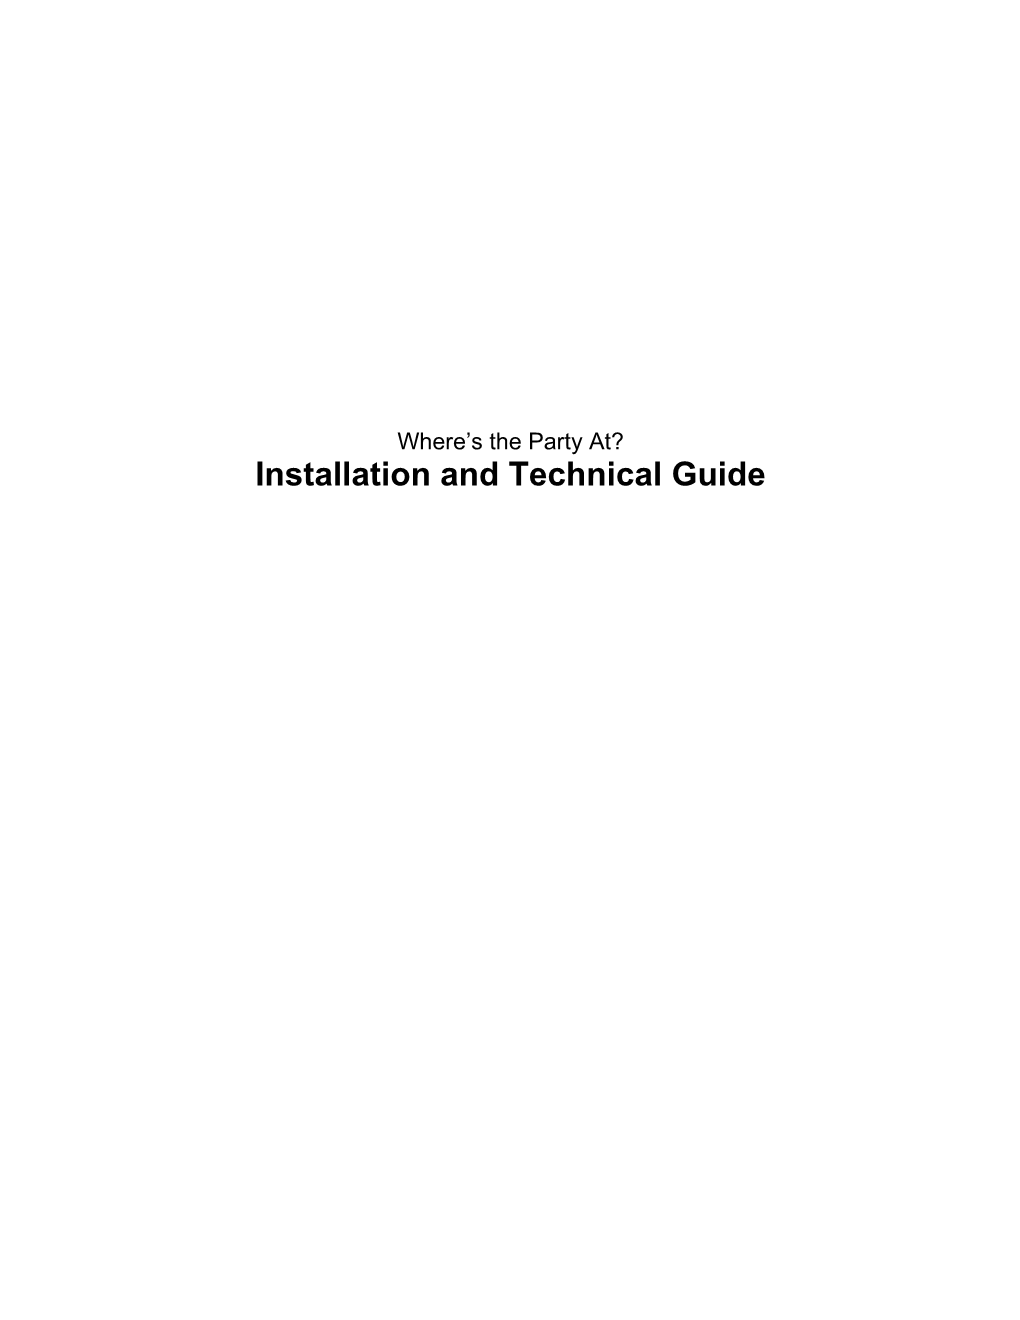 Where S the Party At? Installation Guide